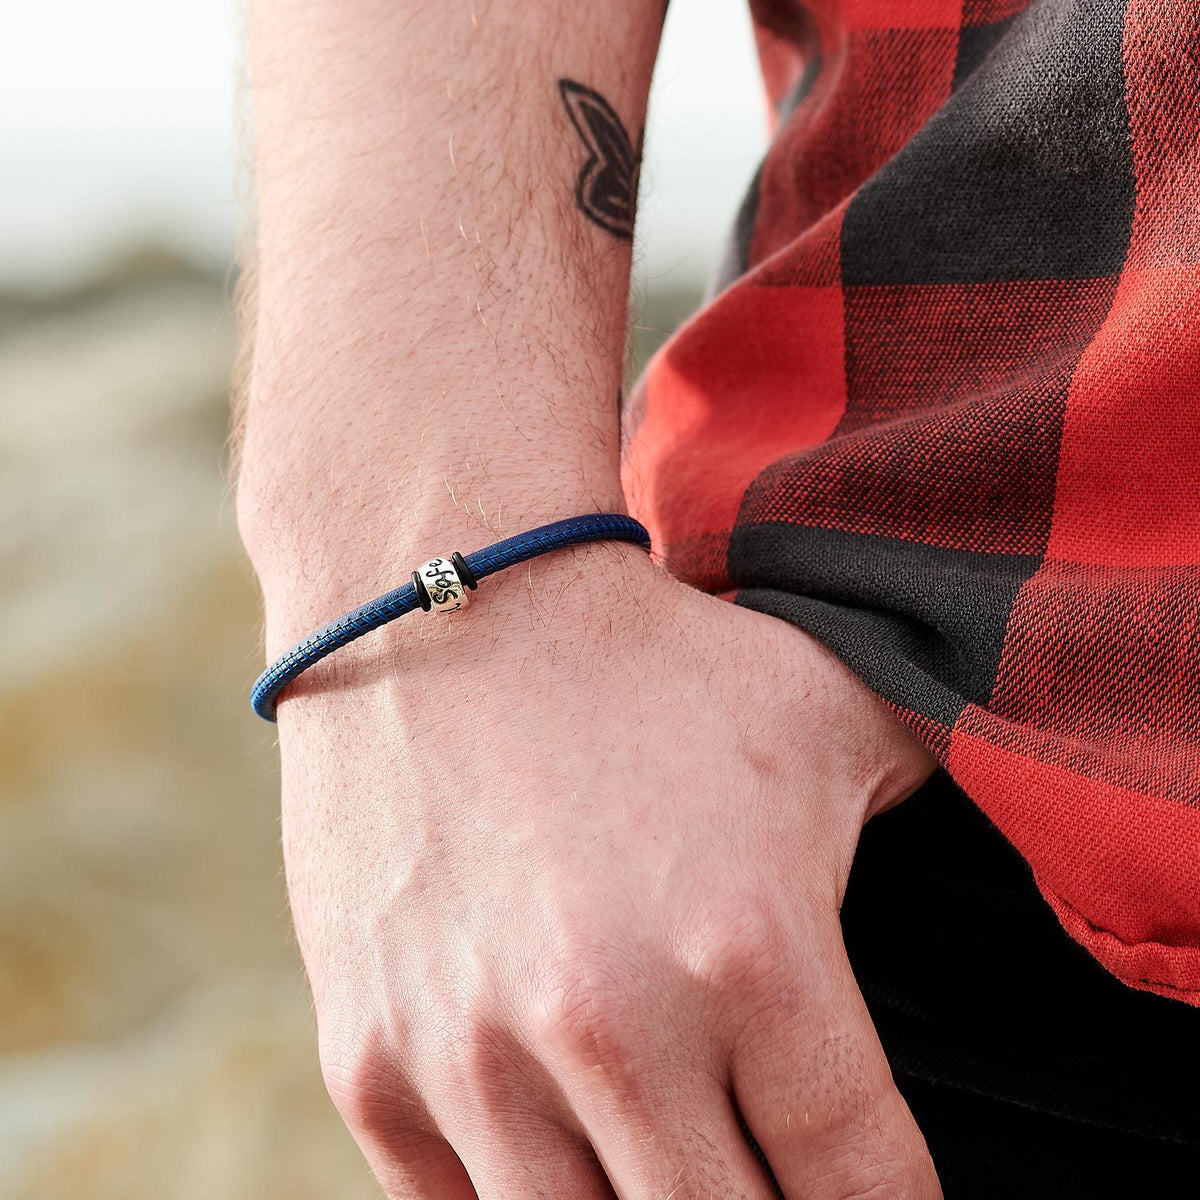 Travel Safe Silver Mens Leather Bracelet - alternative travel gift from Off The map Brighton